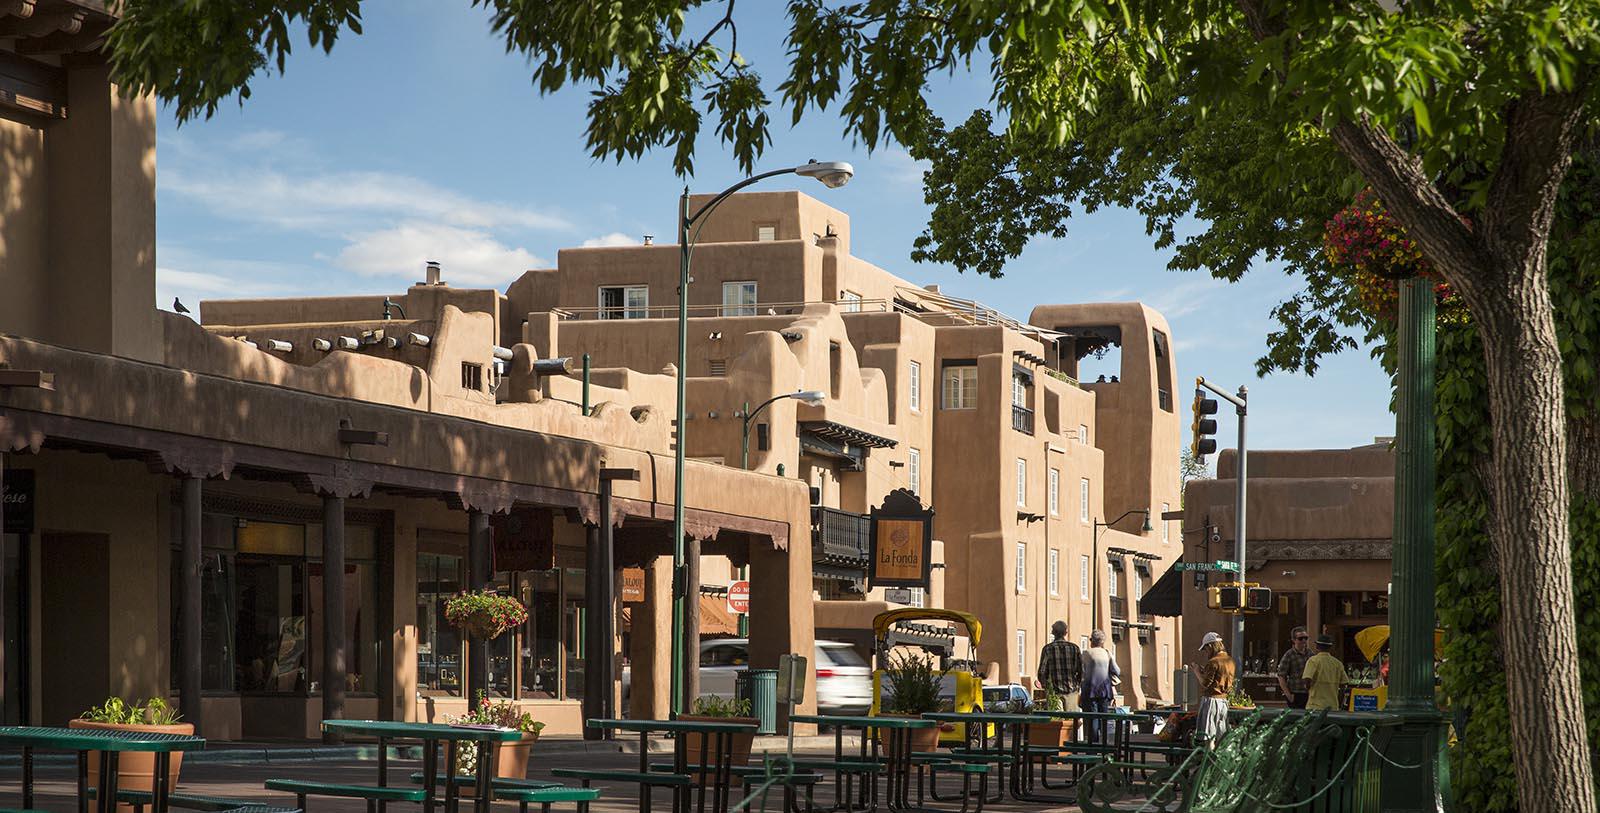 10-facts-about-notable-historical-figures-in-santa-fe-new-mexico